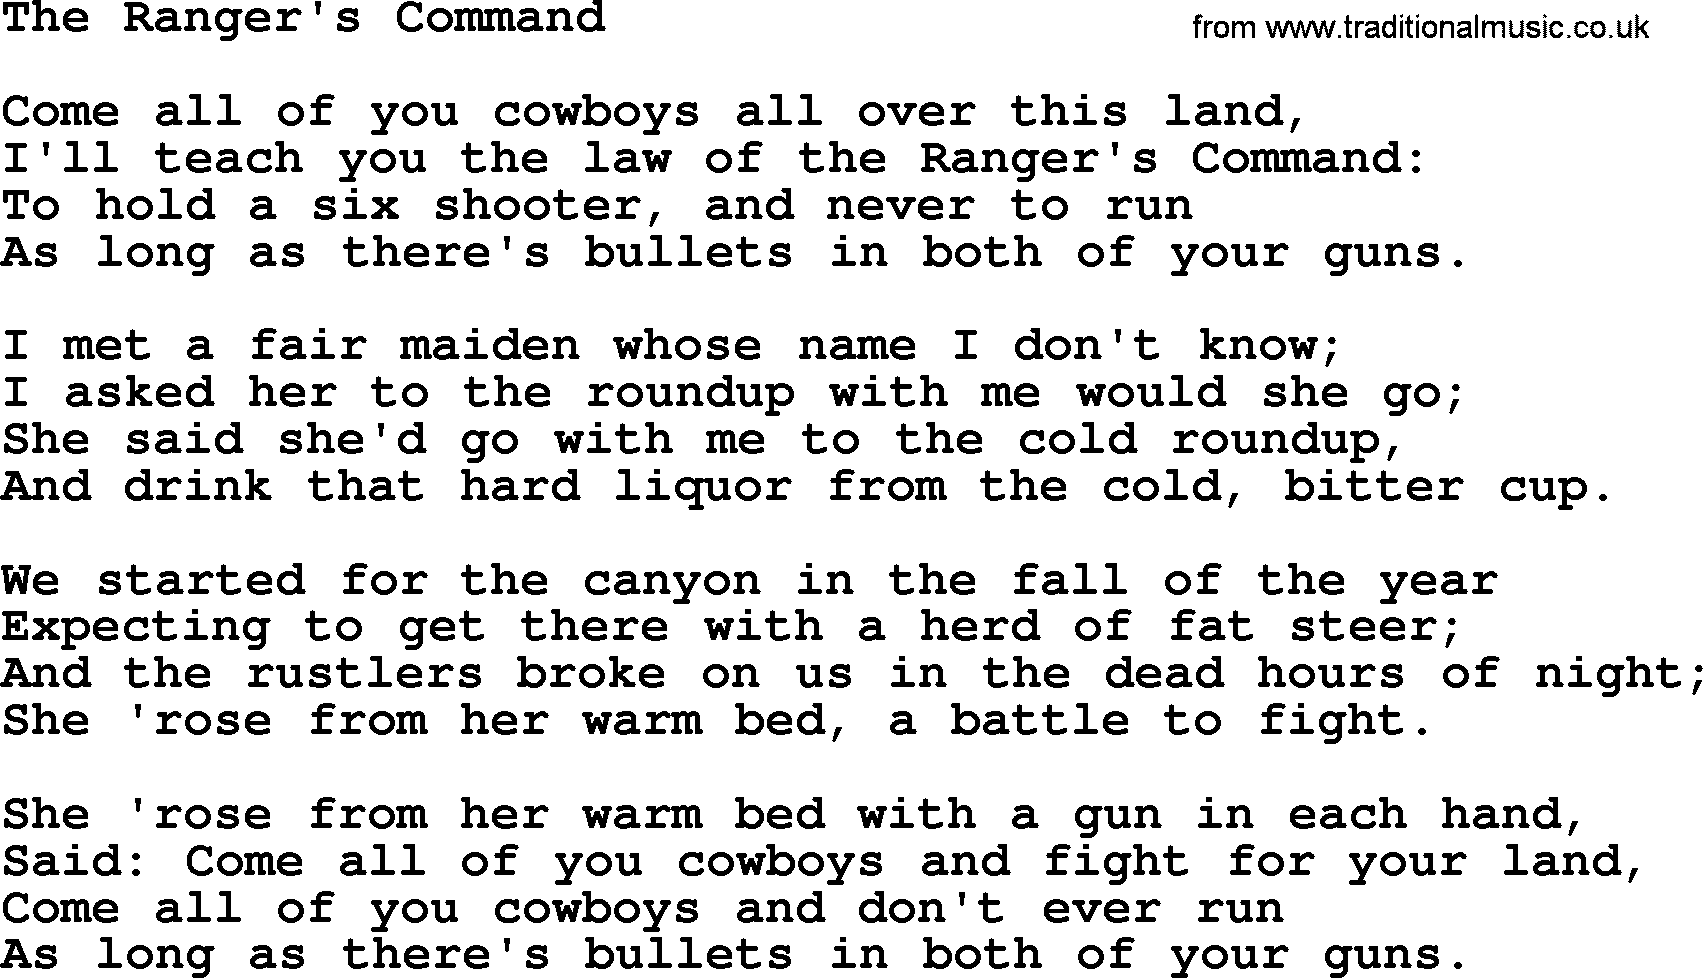 Woody Guthrie song The Rangers Command lyrics